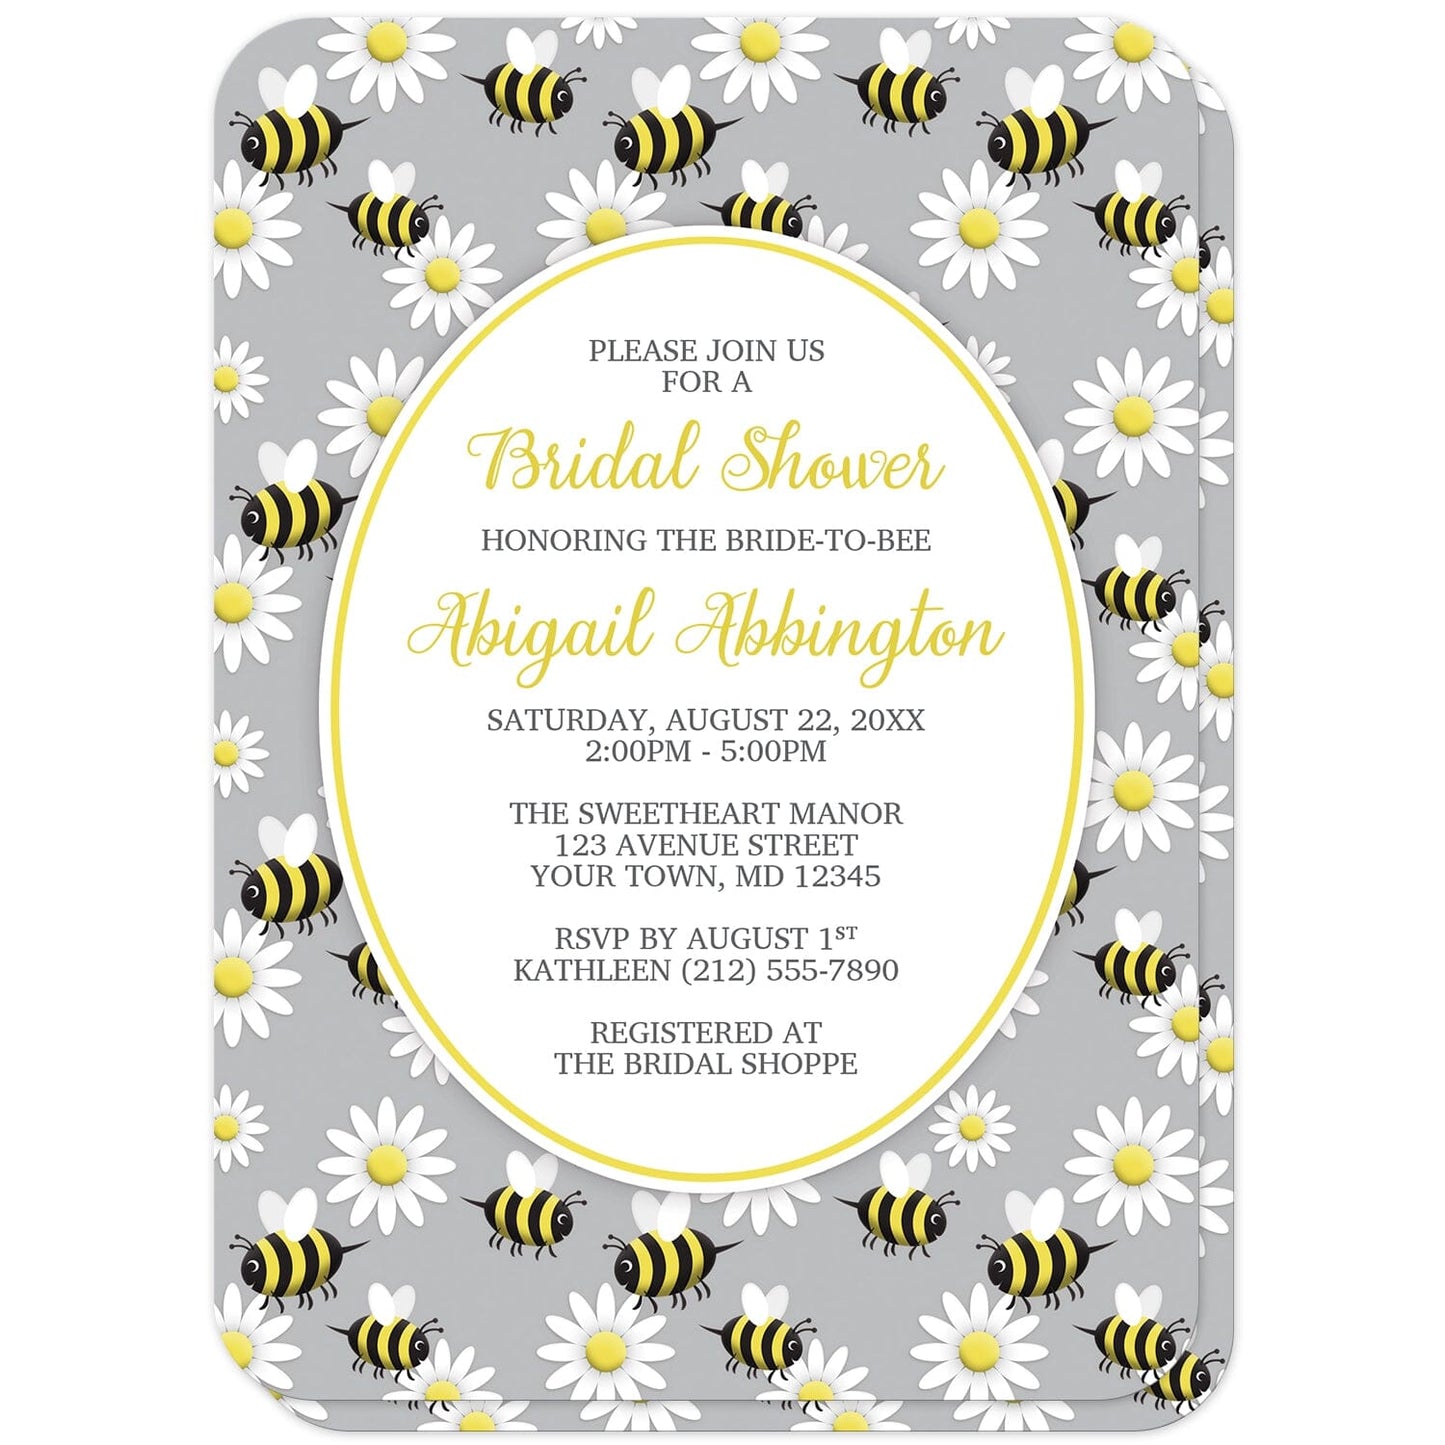 Happy Bee and Daisy Pattern Bridal Shower Invitations (with rounded corners) at Artistically Invited. Happy bee and daisy pattern bridal shower invitations with a background featuring a pattern of a yellow and black happy bees and white daisy flowers over gray. Your personalized bridal shower celebration details are custom printed in yellow and dark gray in a white oval outlined in yellow in the center.